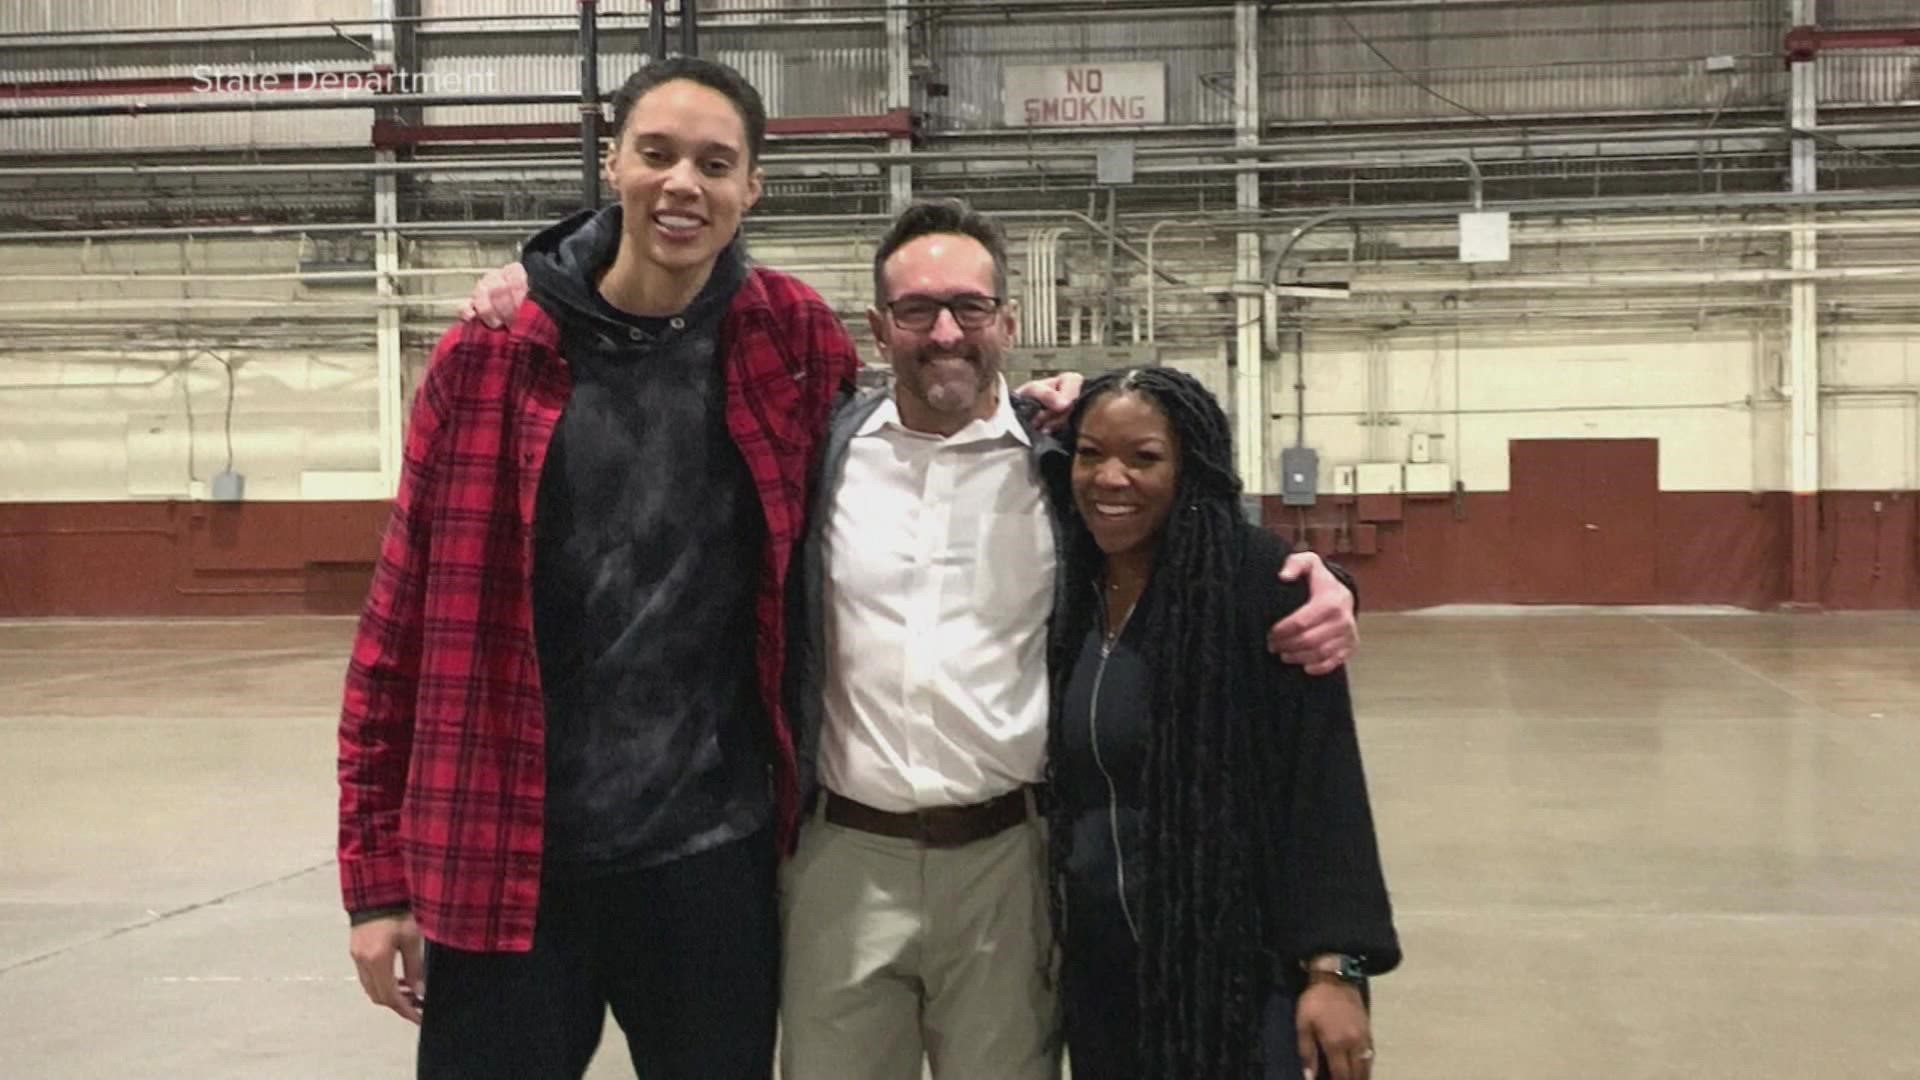 A U.S. envoy shared details of Griner's flight home, saying the star was thrilled to hear English and meet the plane's crew.